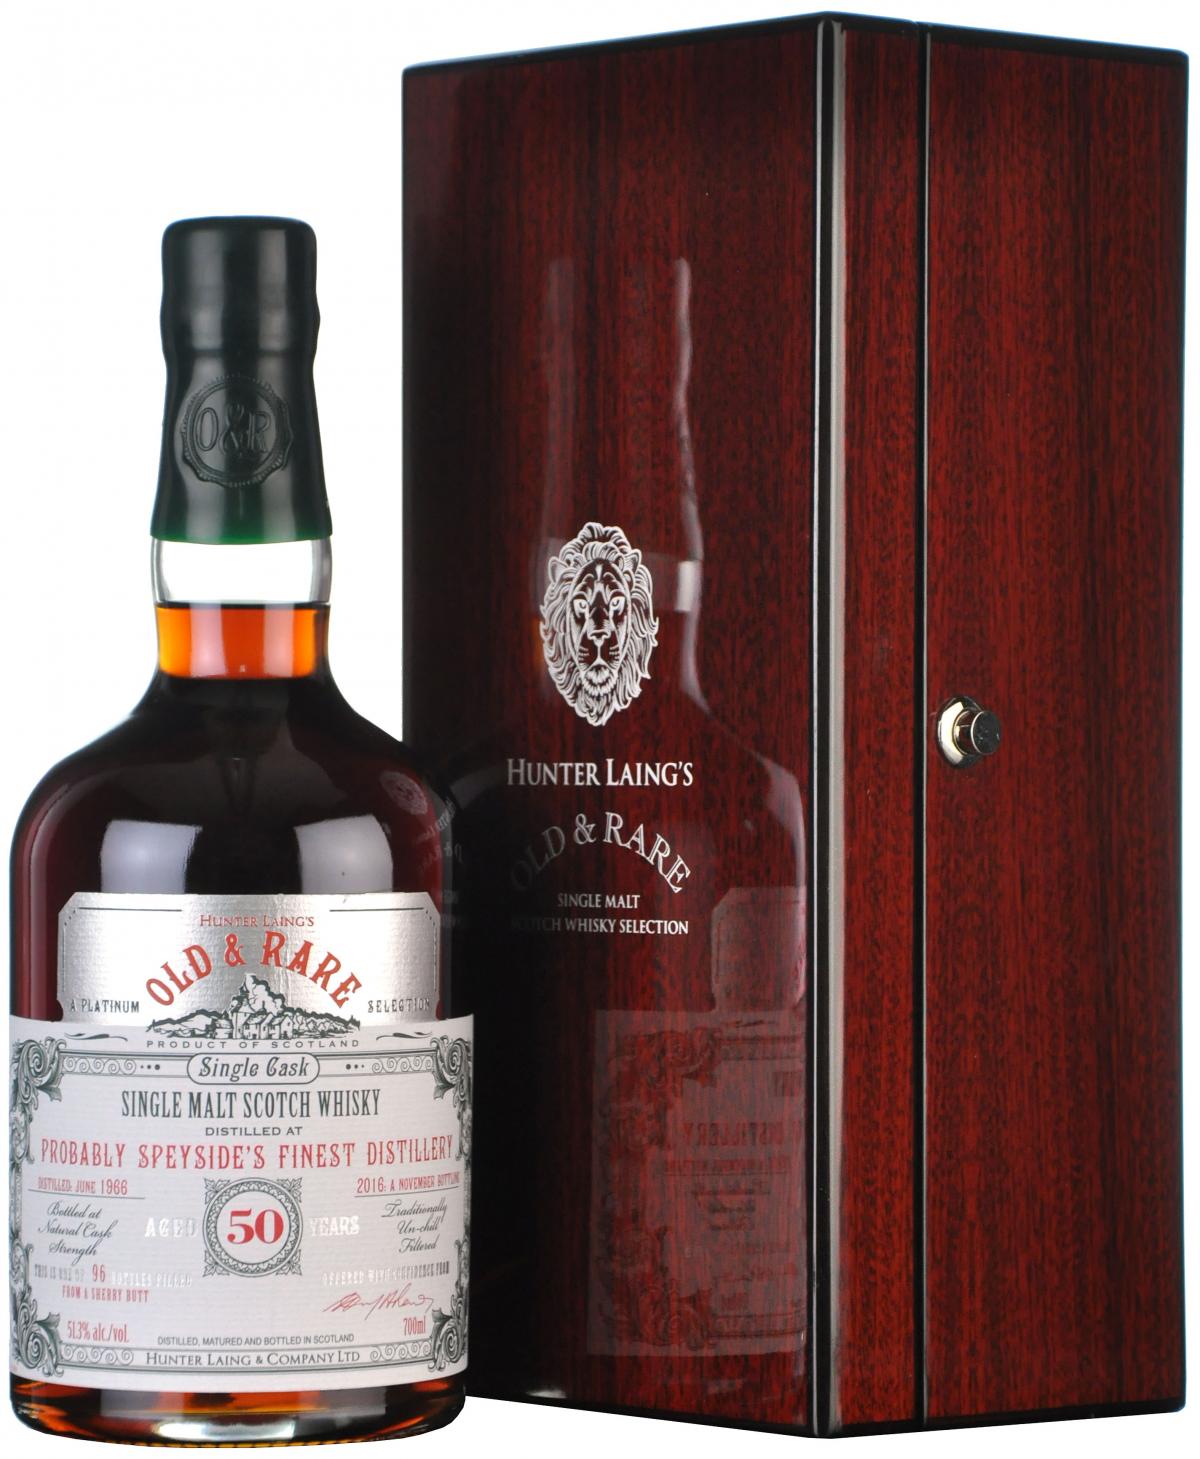 Probably Speyside's Finest 1966-2016 | 50 Year Old | Old & Rare Platinum Selection